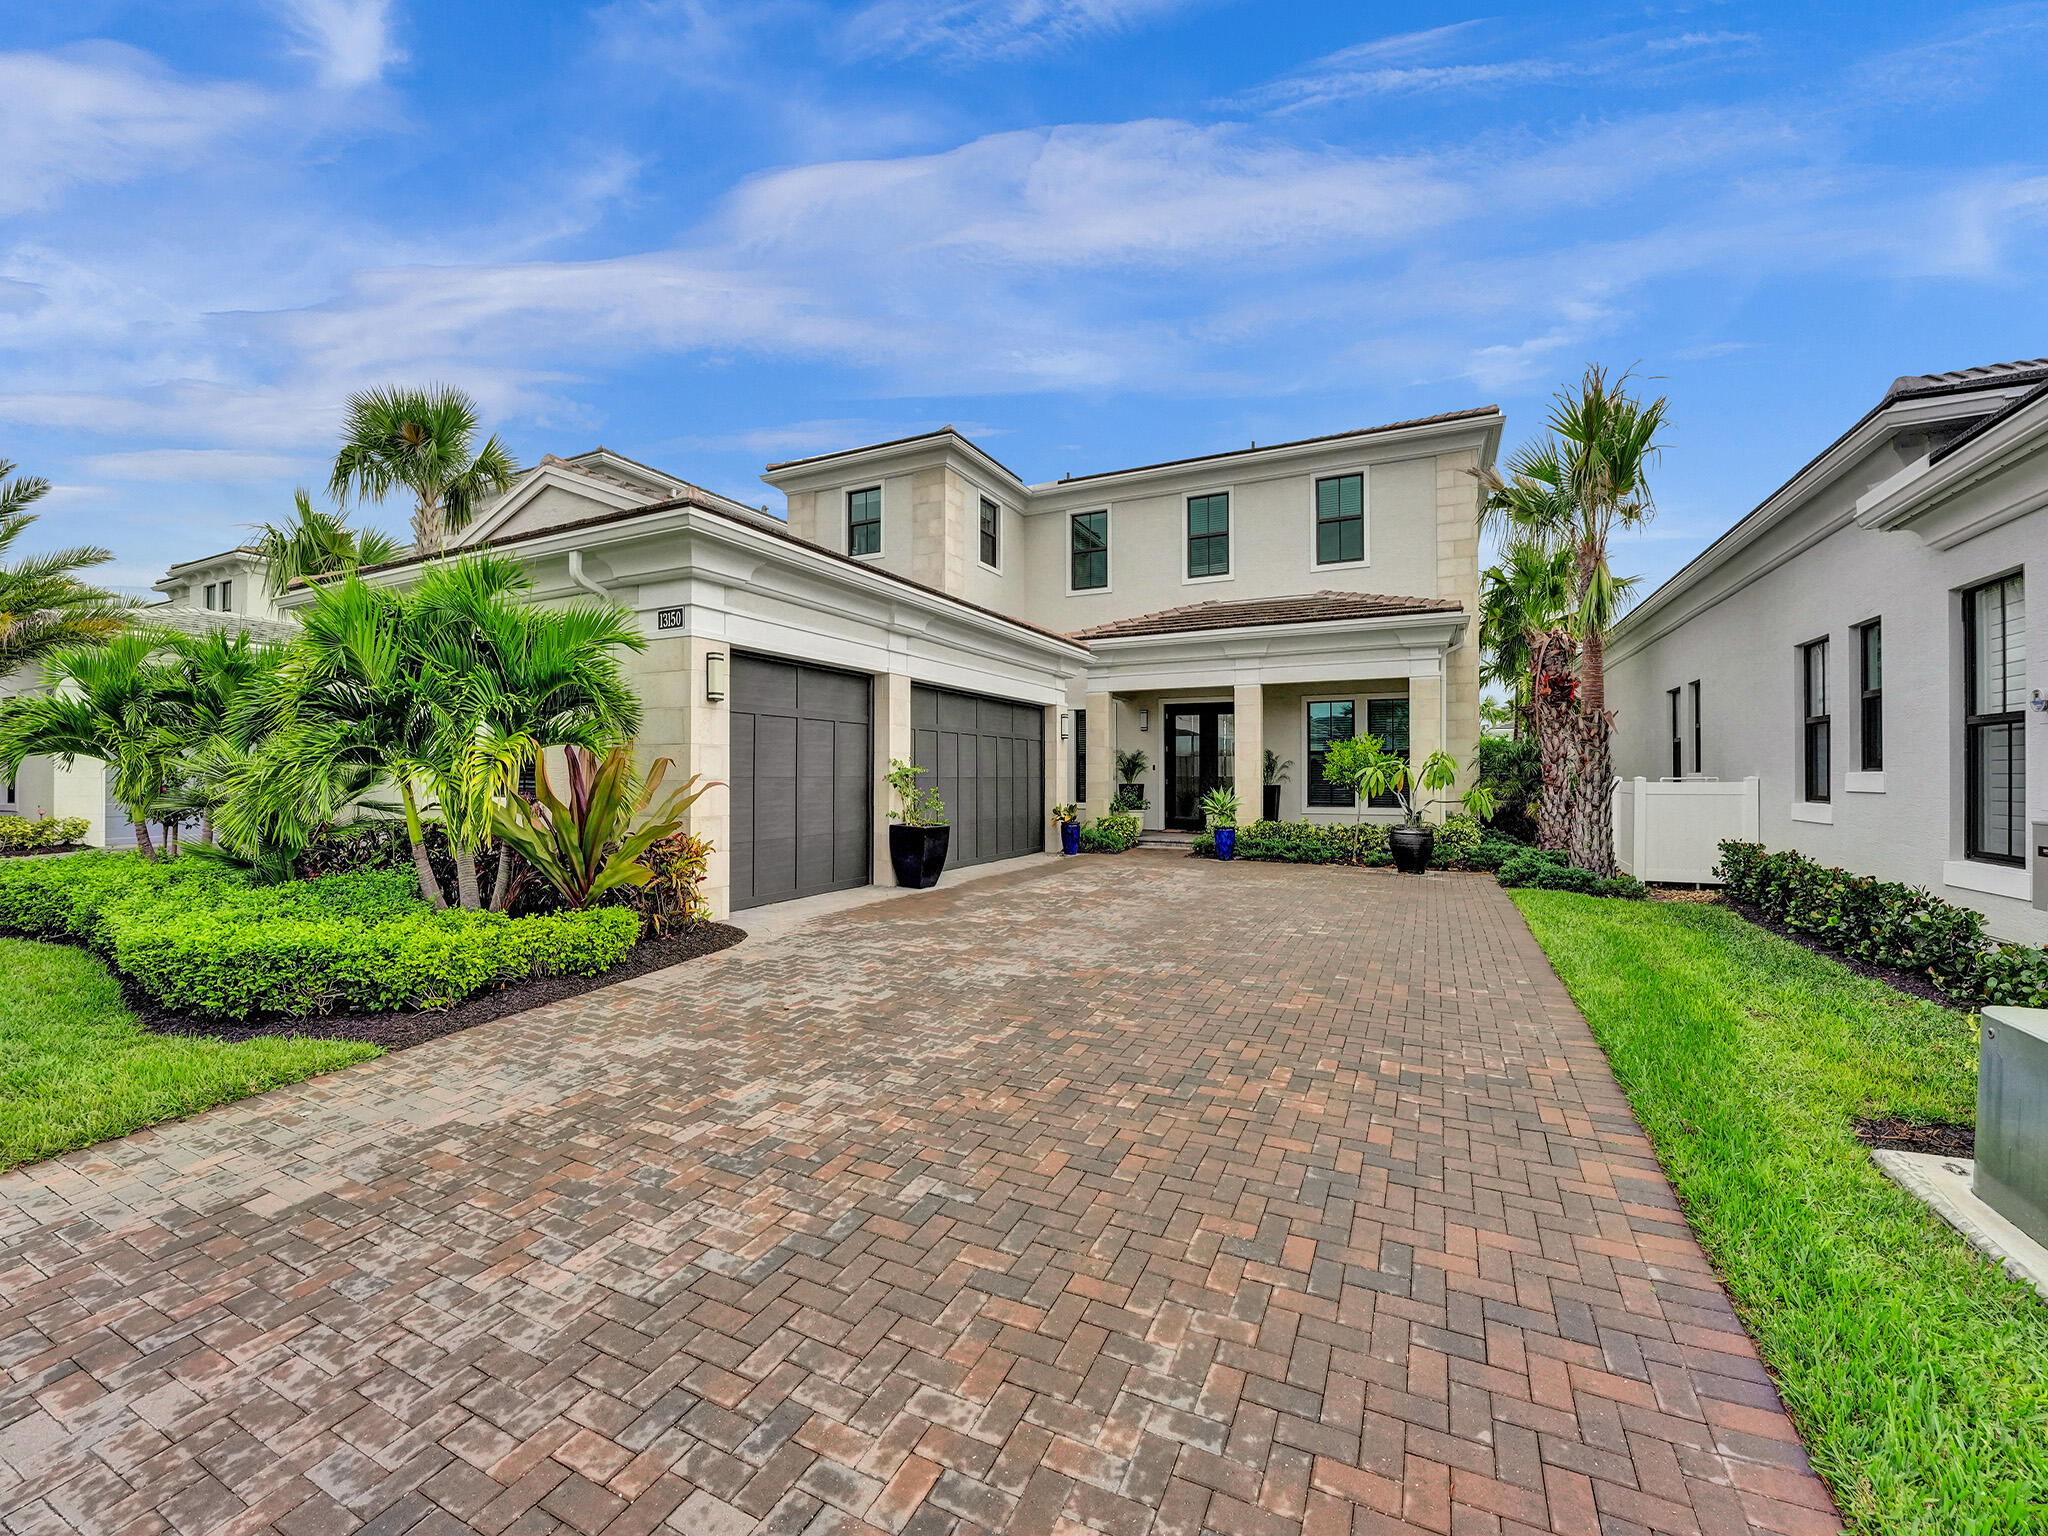 13150 Faberge Place, Palm Beach Gardens, Palm Beach County, Florida - 4 Bedrooms  
4.5 Bathrooms - 